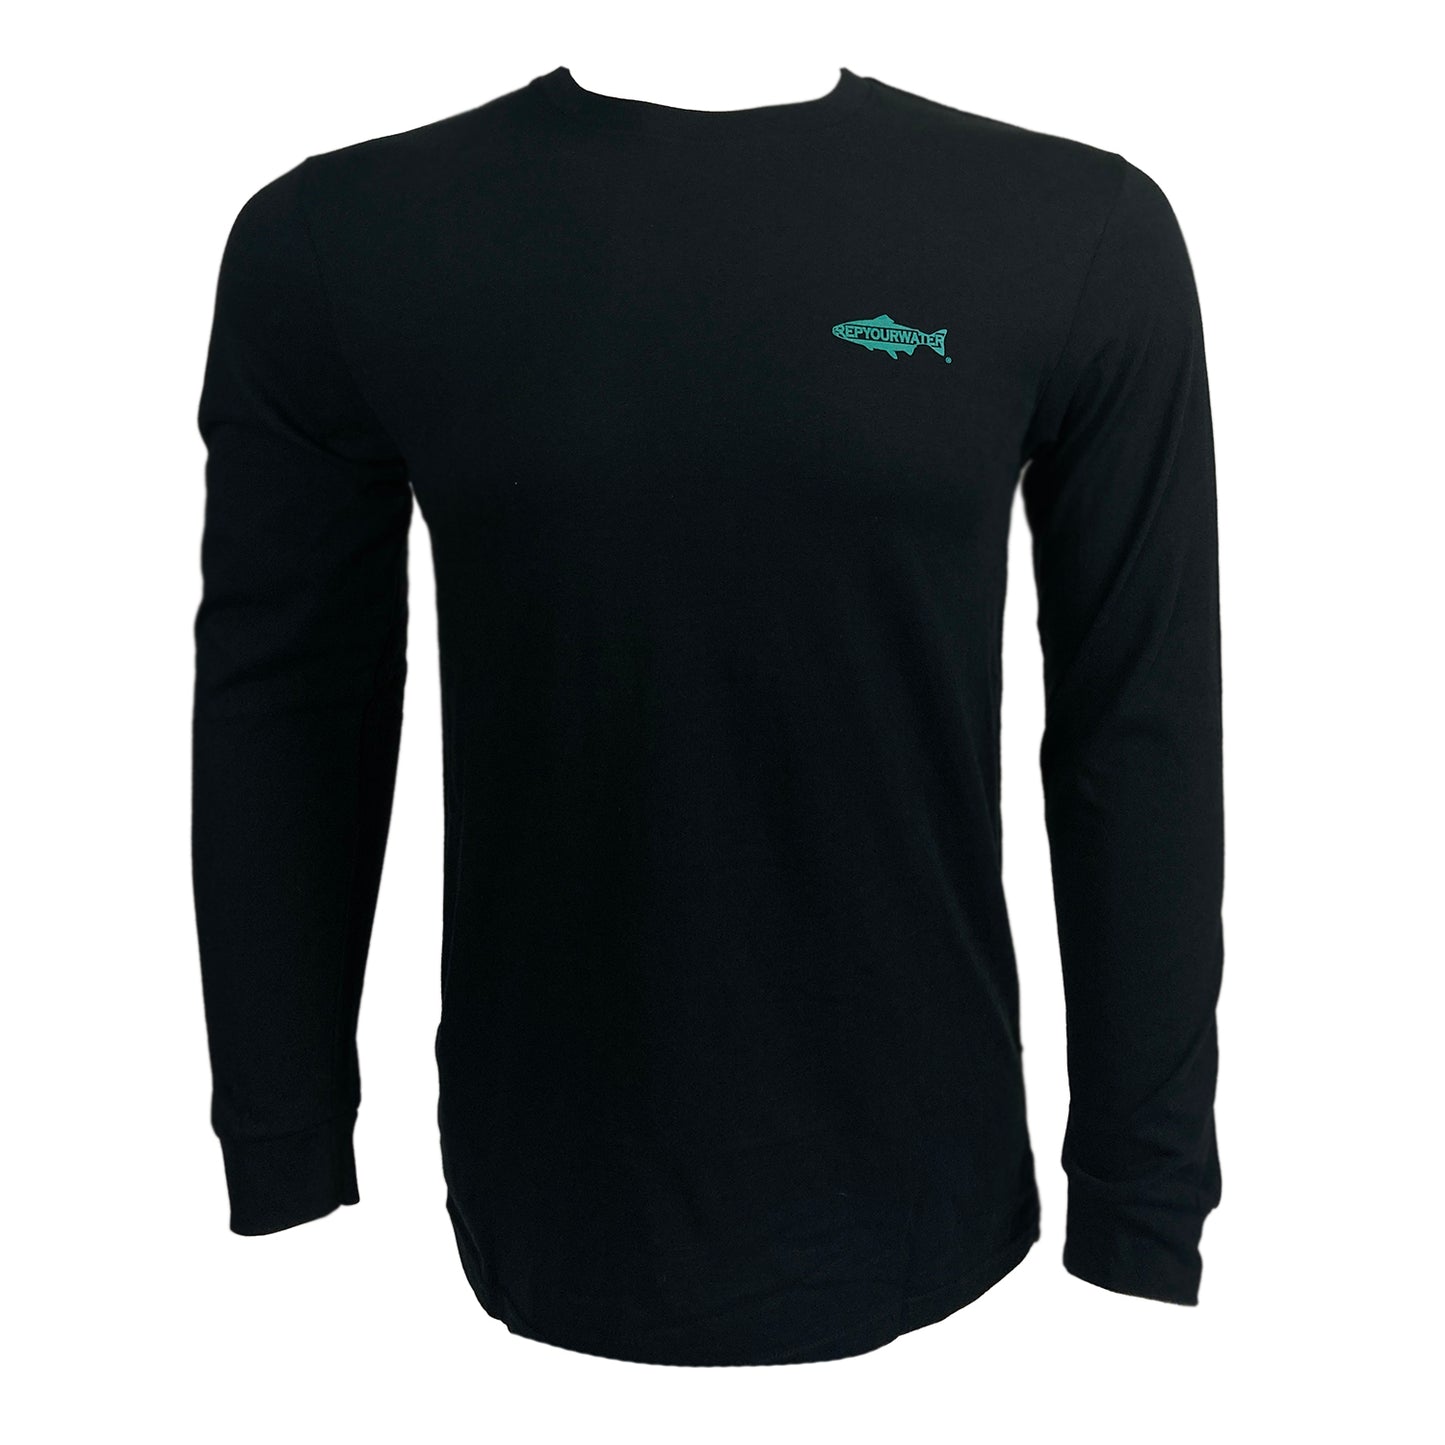 Black long sleeved tee shown from the front with blue Rep Your Water logo on wearer's left chest.